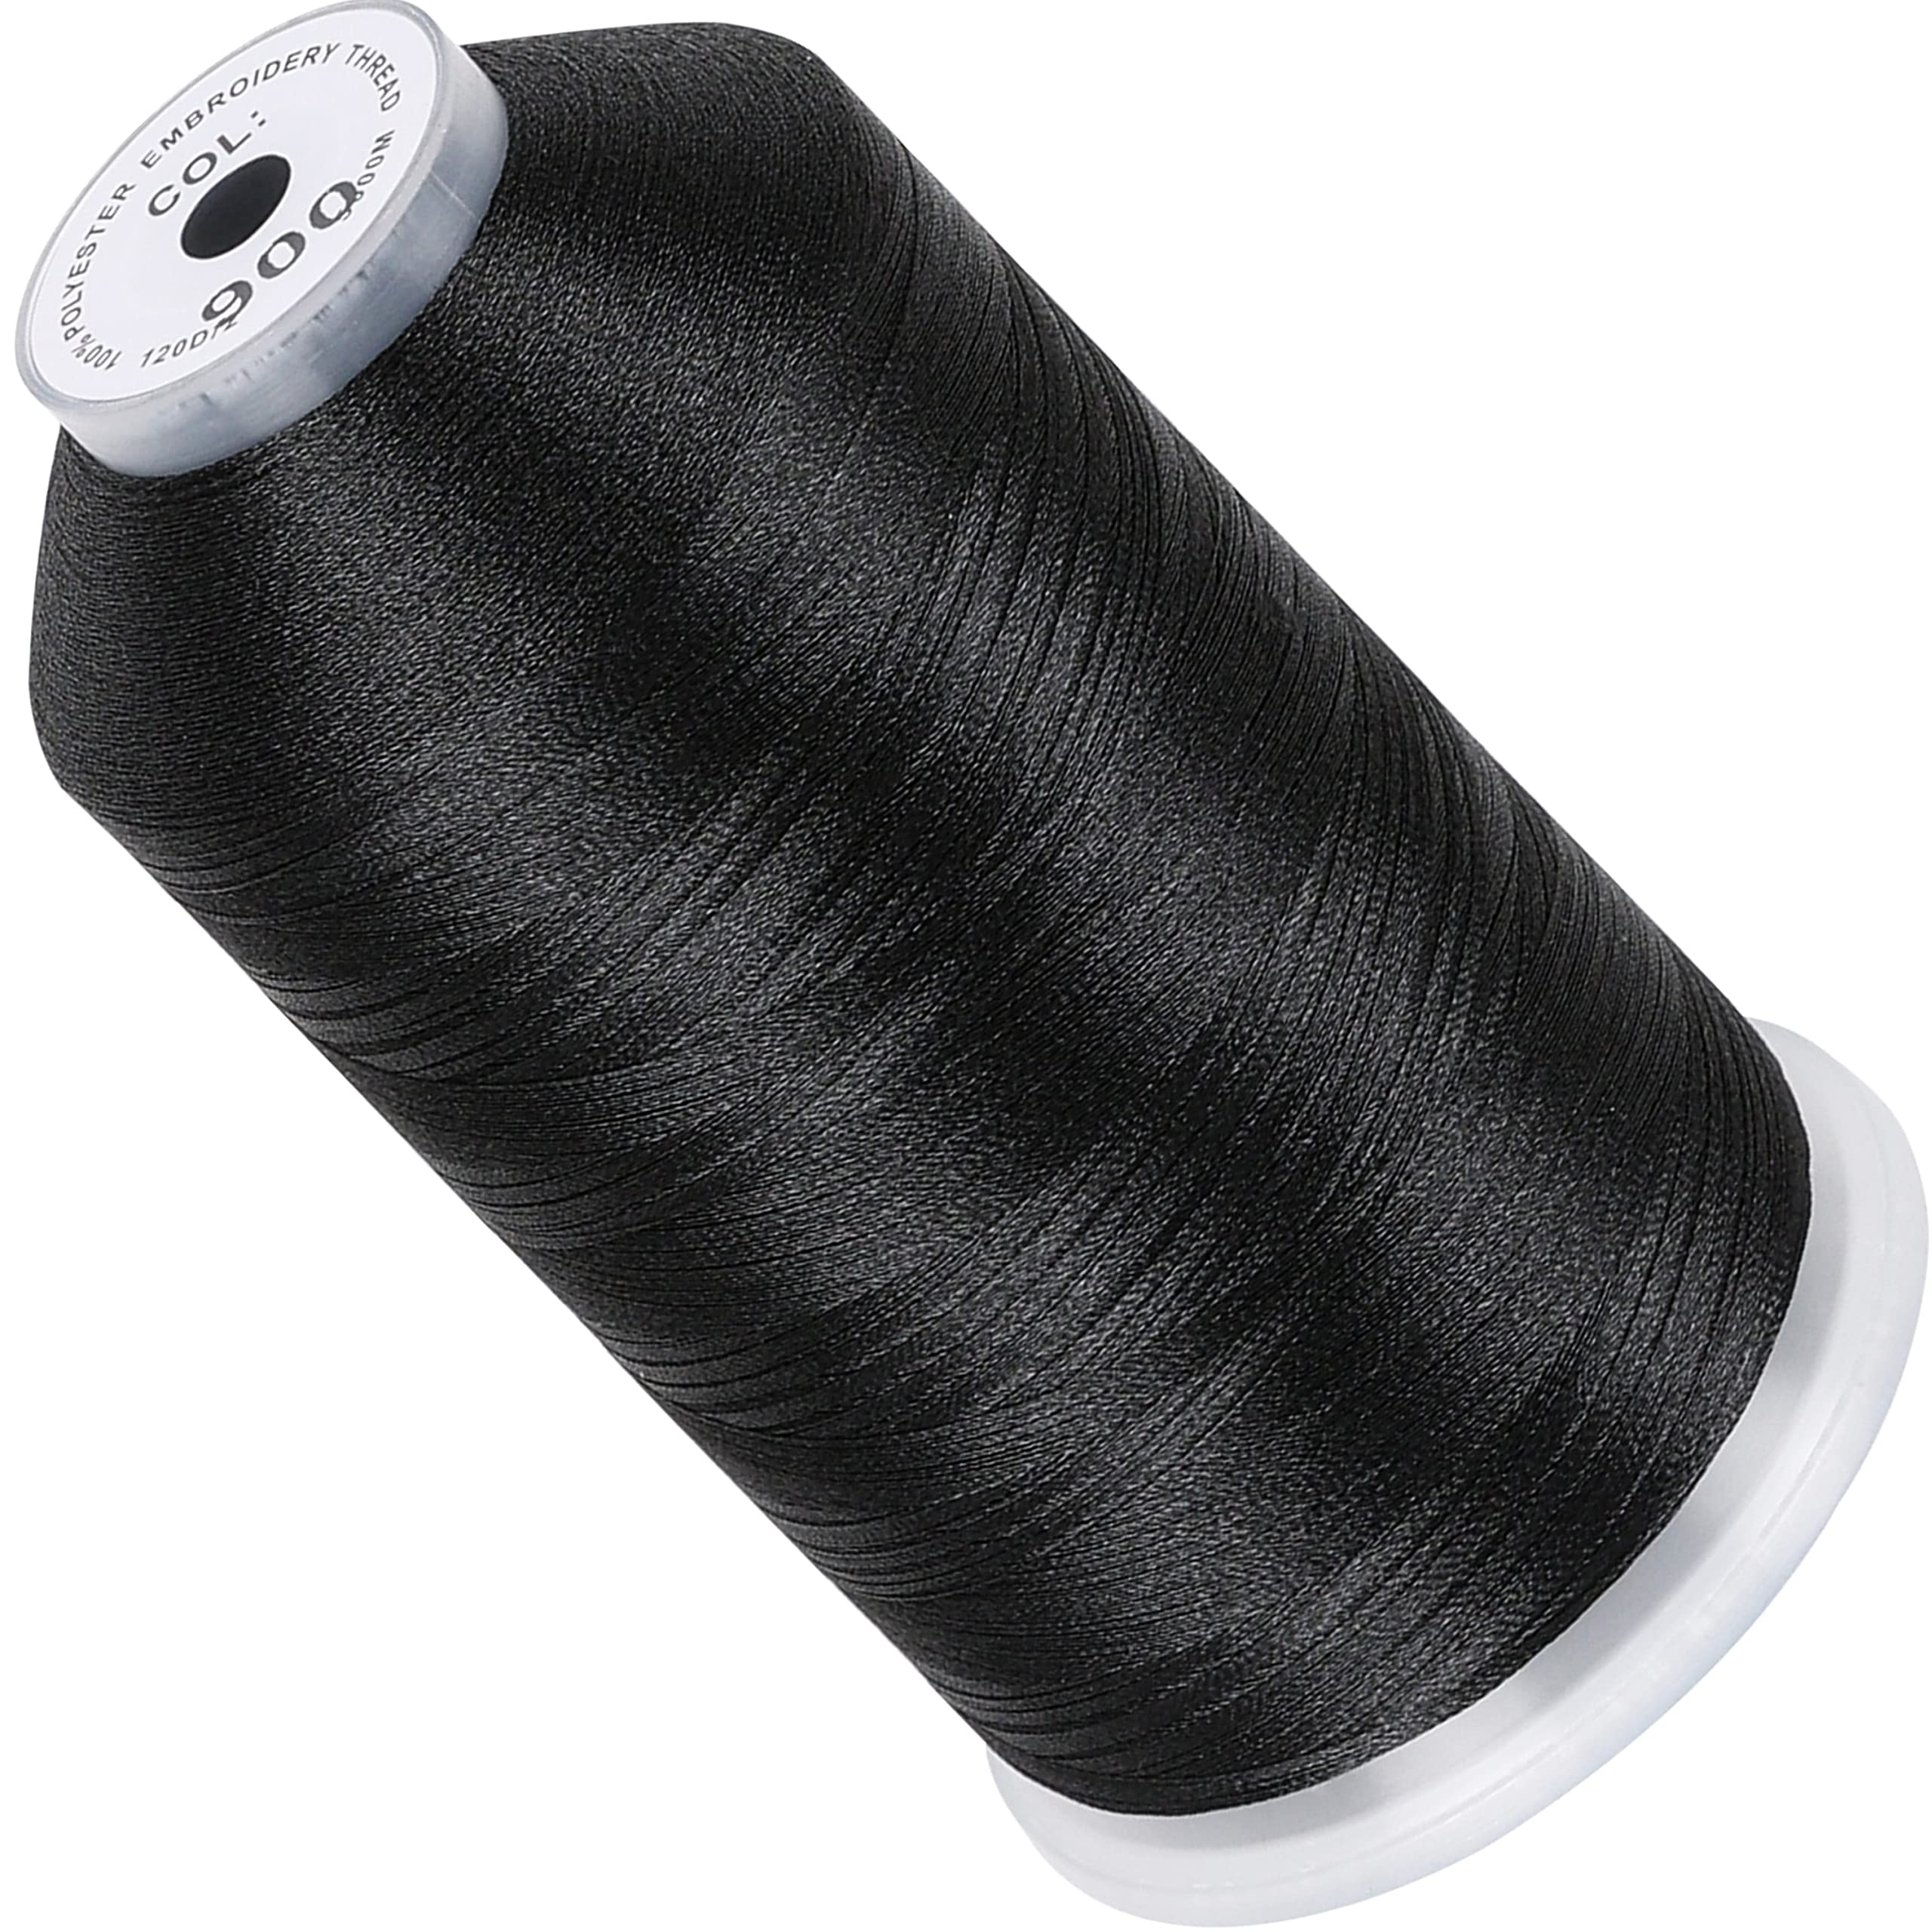 New brothread - Single Huge Spool 5000M Each Polyester Embroidery Machine  Thread 40WT for Commercial and Domestic Machines - Black Black-900